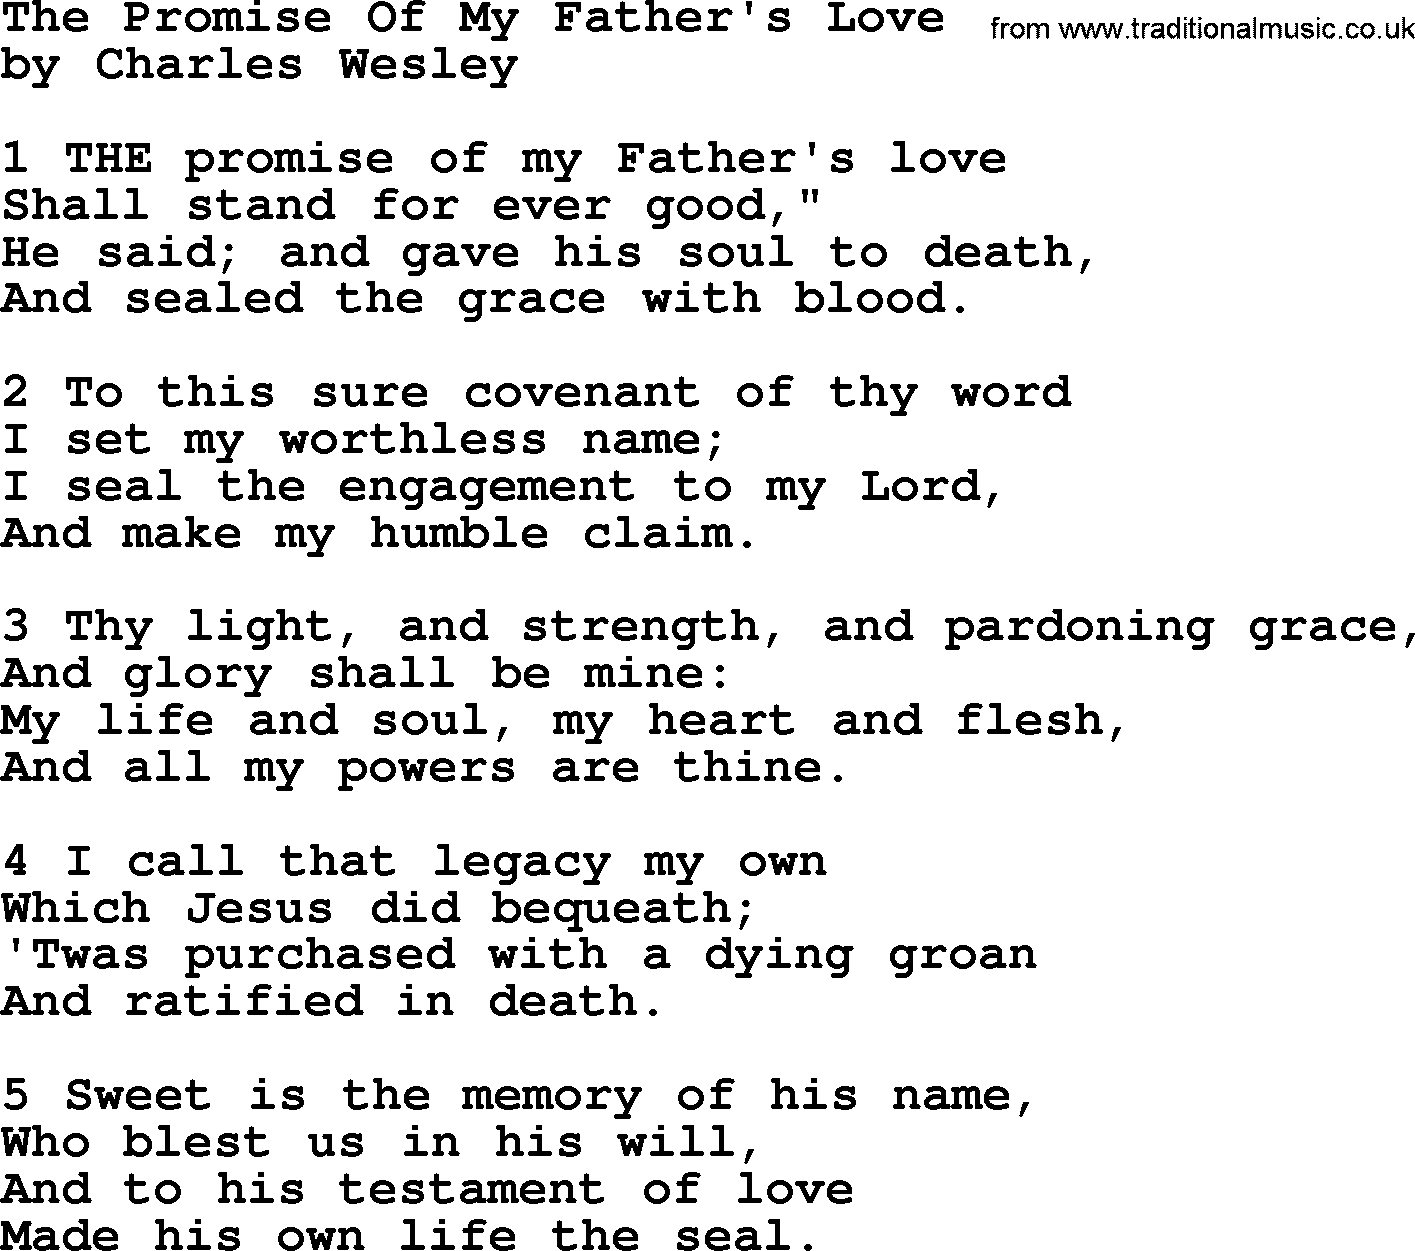 Charles Wesley hymn: The Promise Of My Father's Love, lyrics